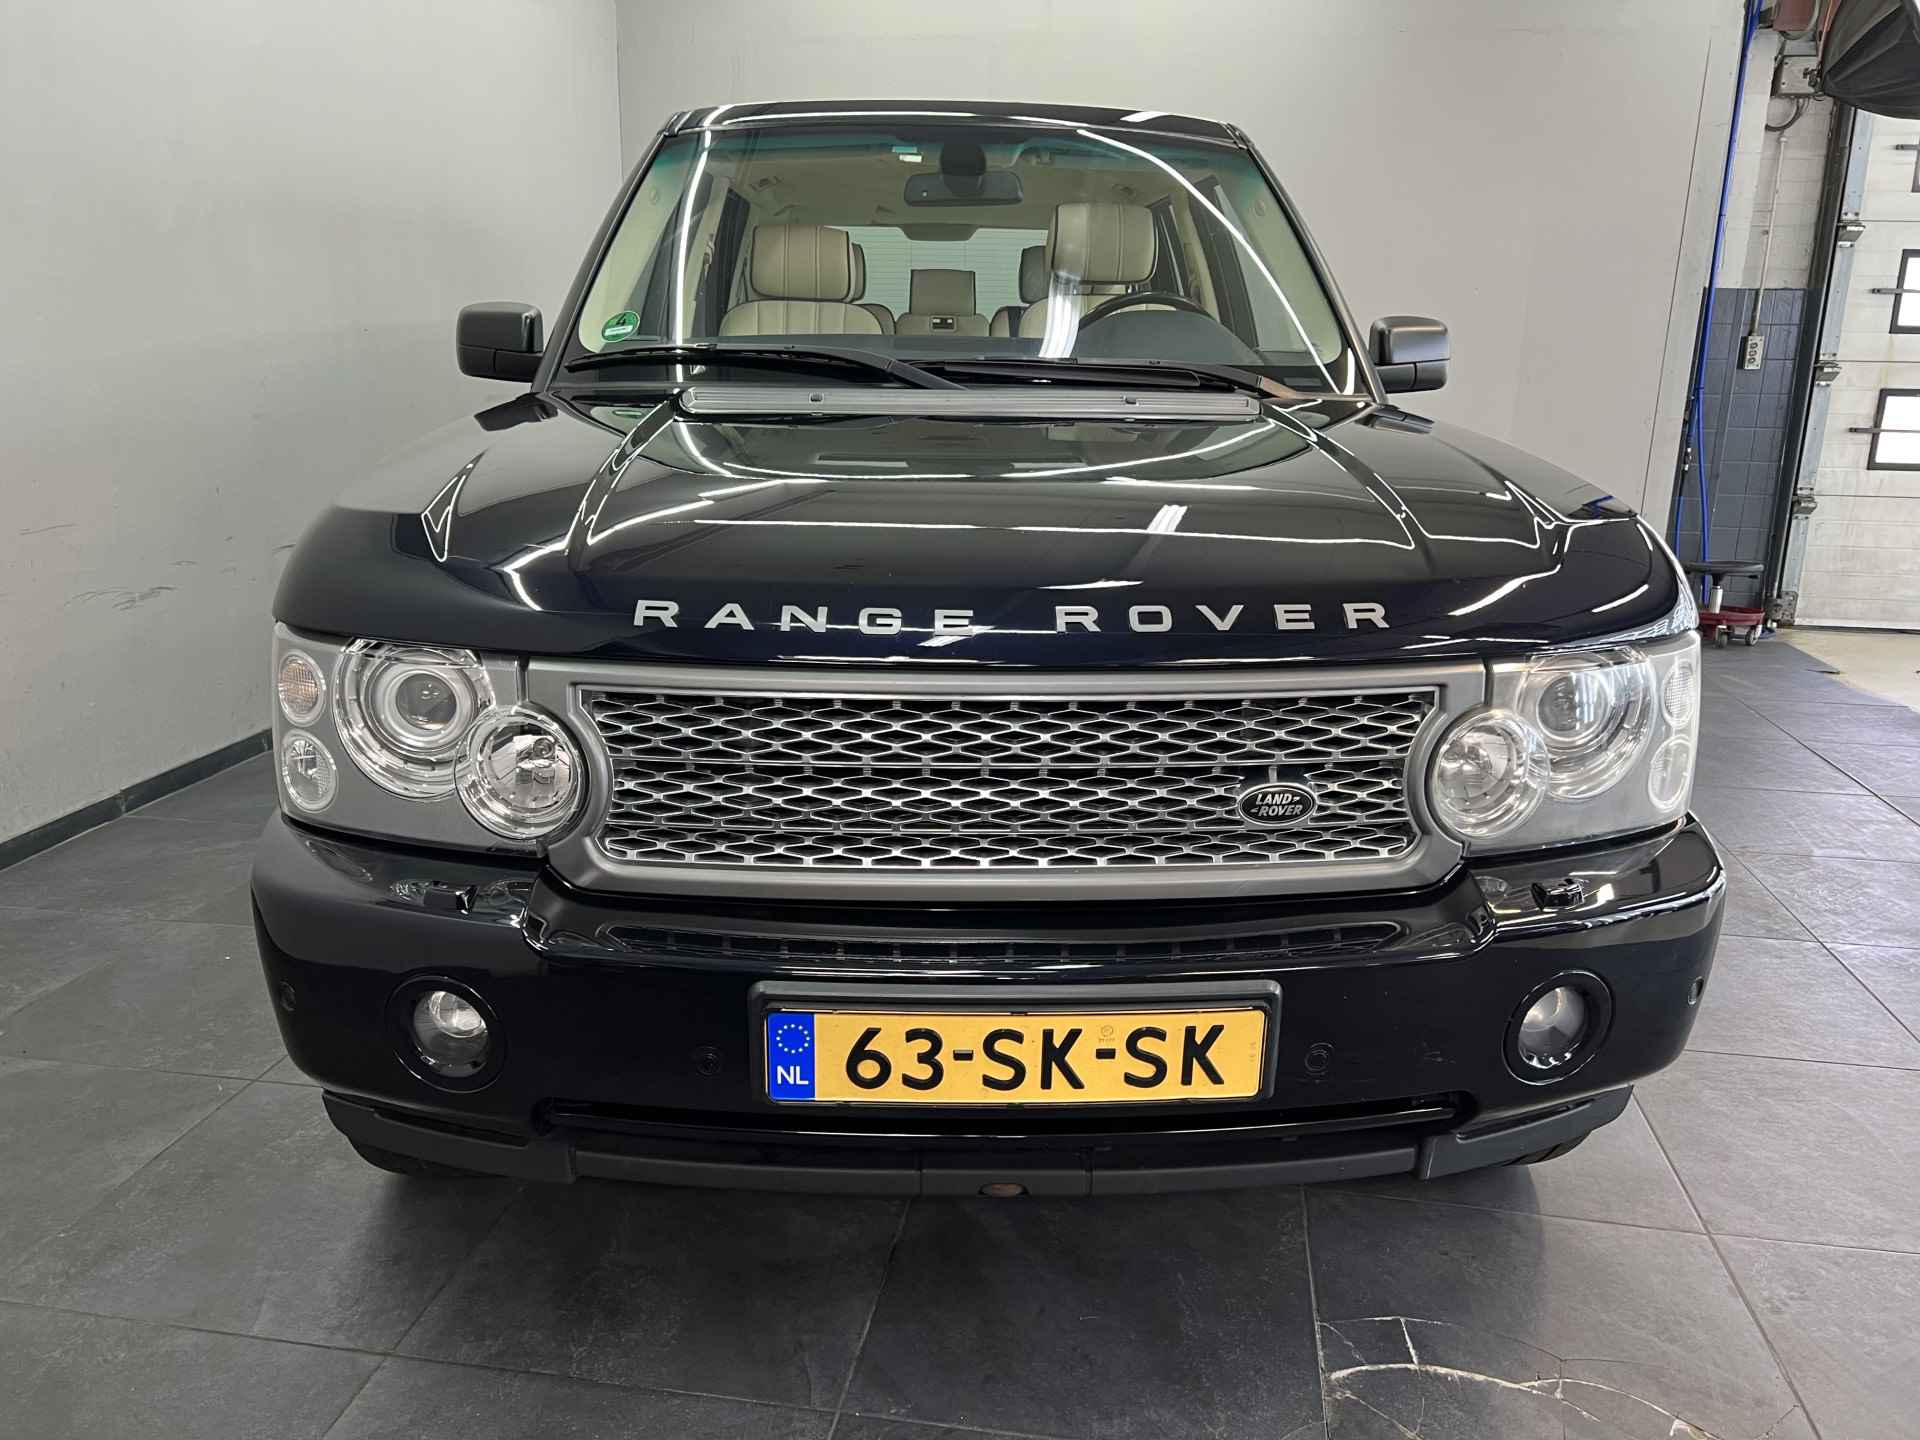 Land Rover Range Rover 4.2 V8 Supercharged ✅UNIEKE STAAT✅Airco✅Cruise controle✅Navigatie✅5 deurs✅TREKHAAK - 6/52